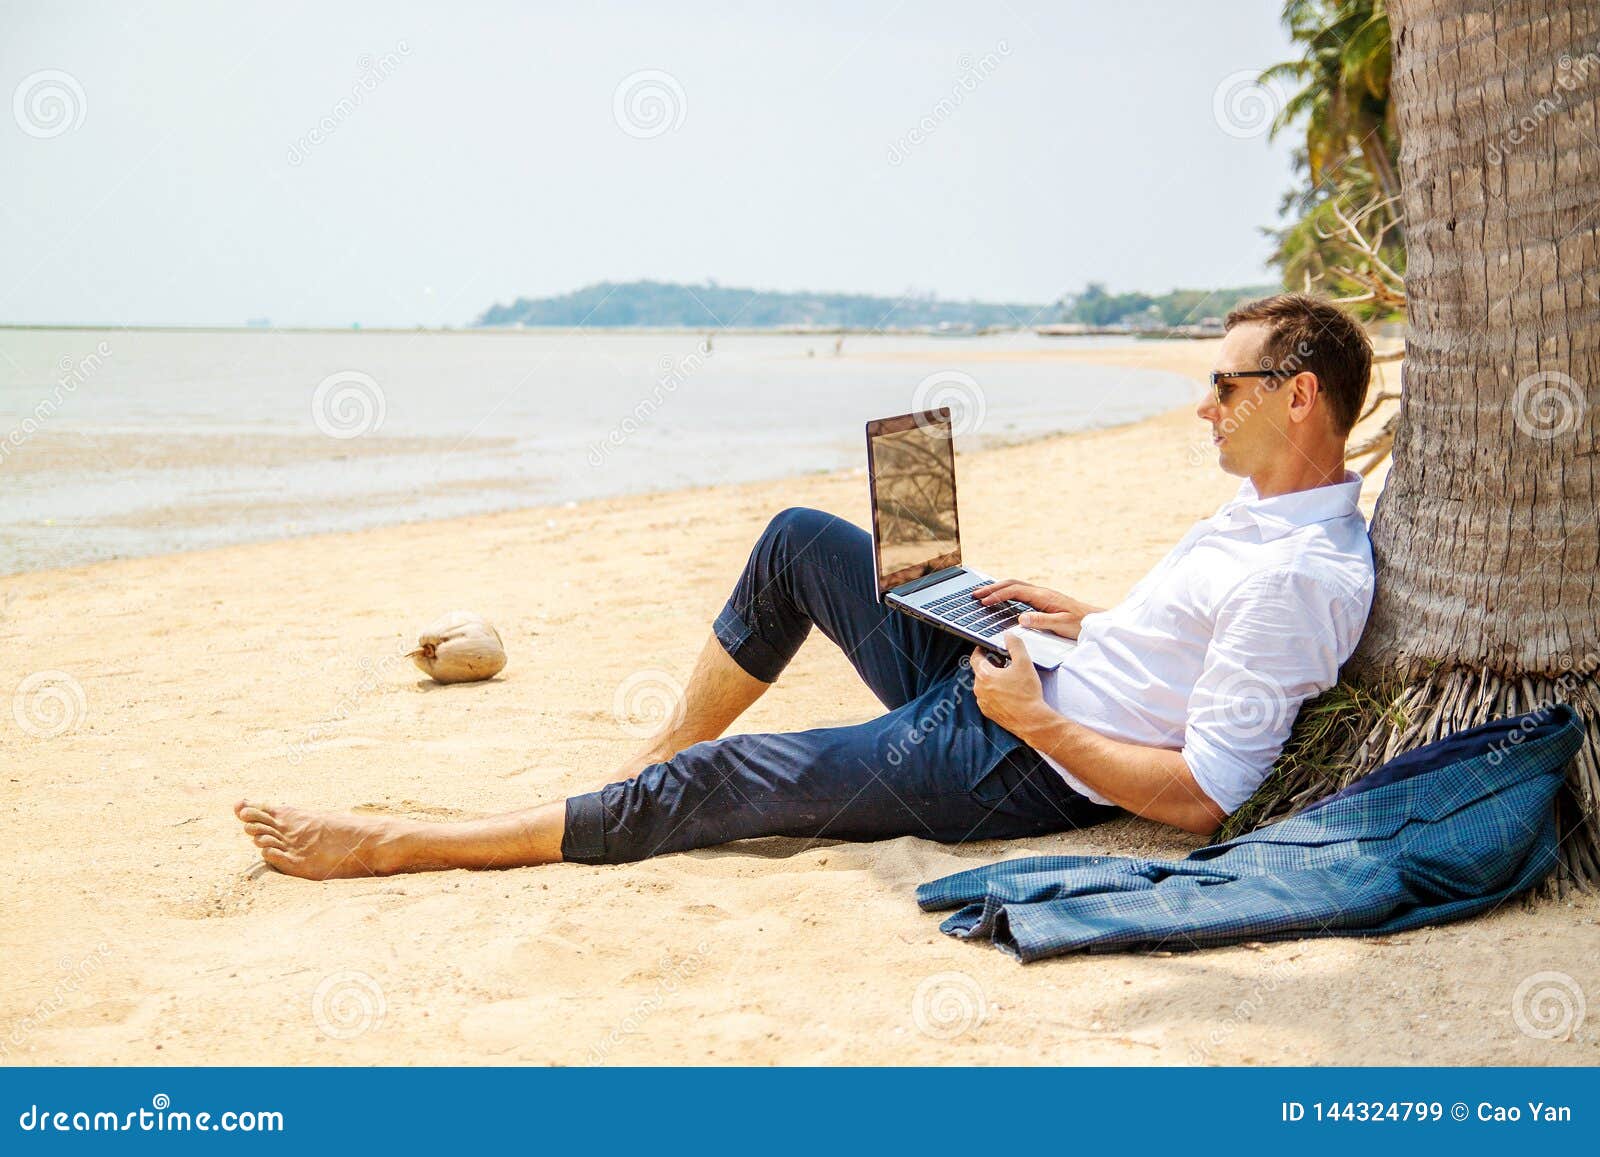 telecommuting, businessman relaxing on the beach with laptop and palm, freelancer workplace, dream job.